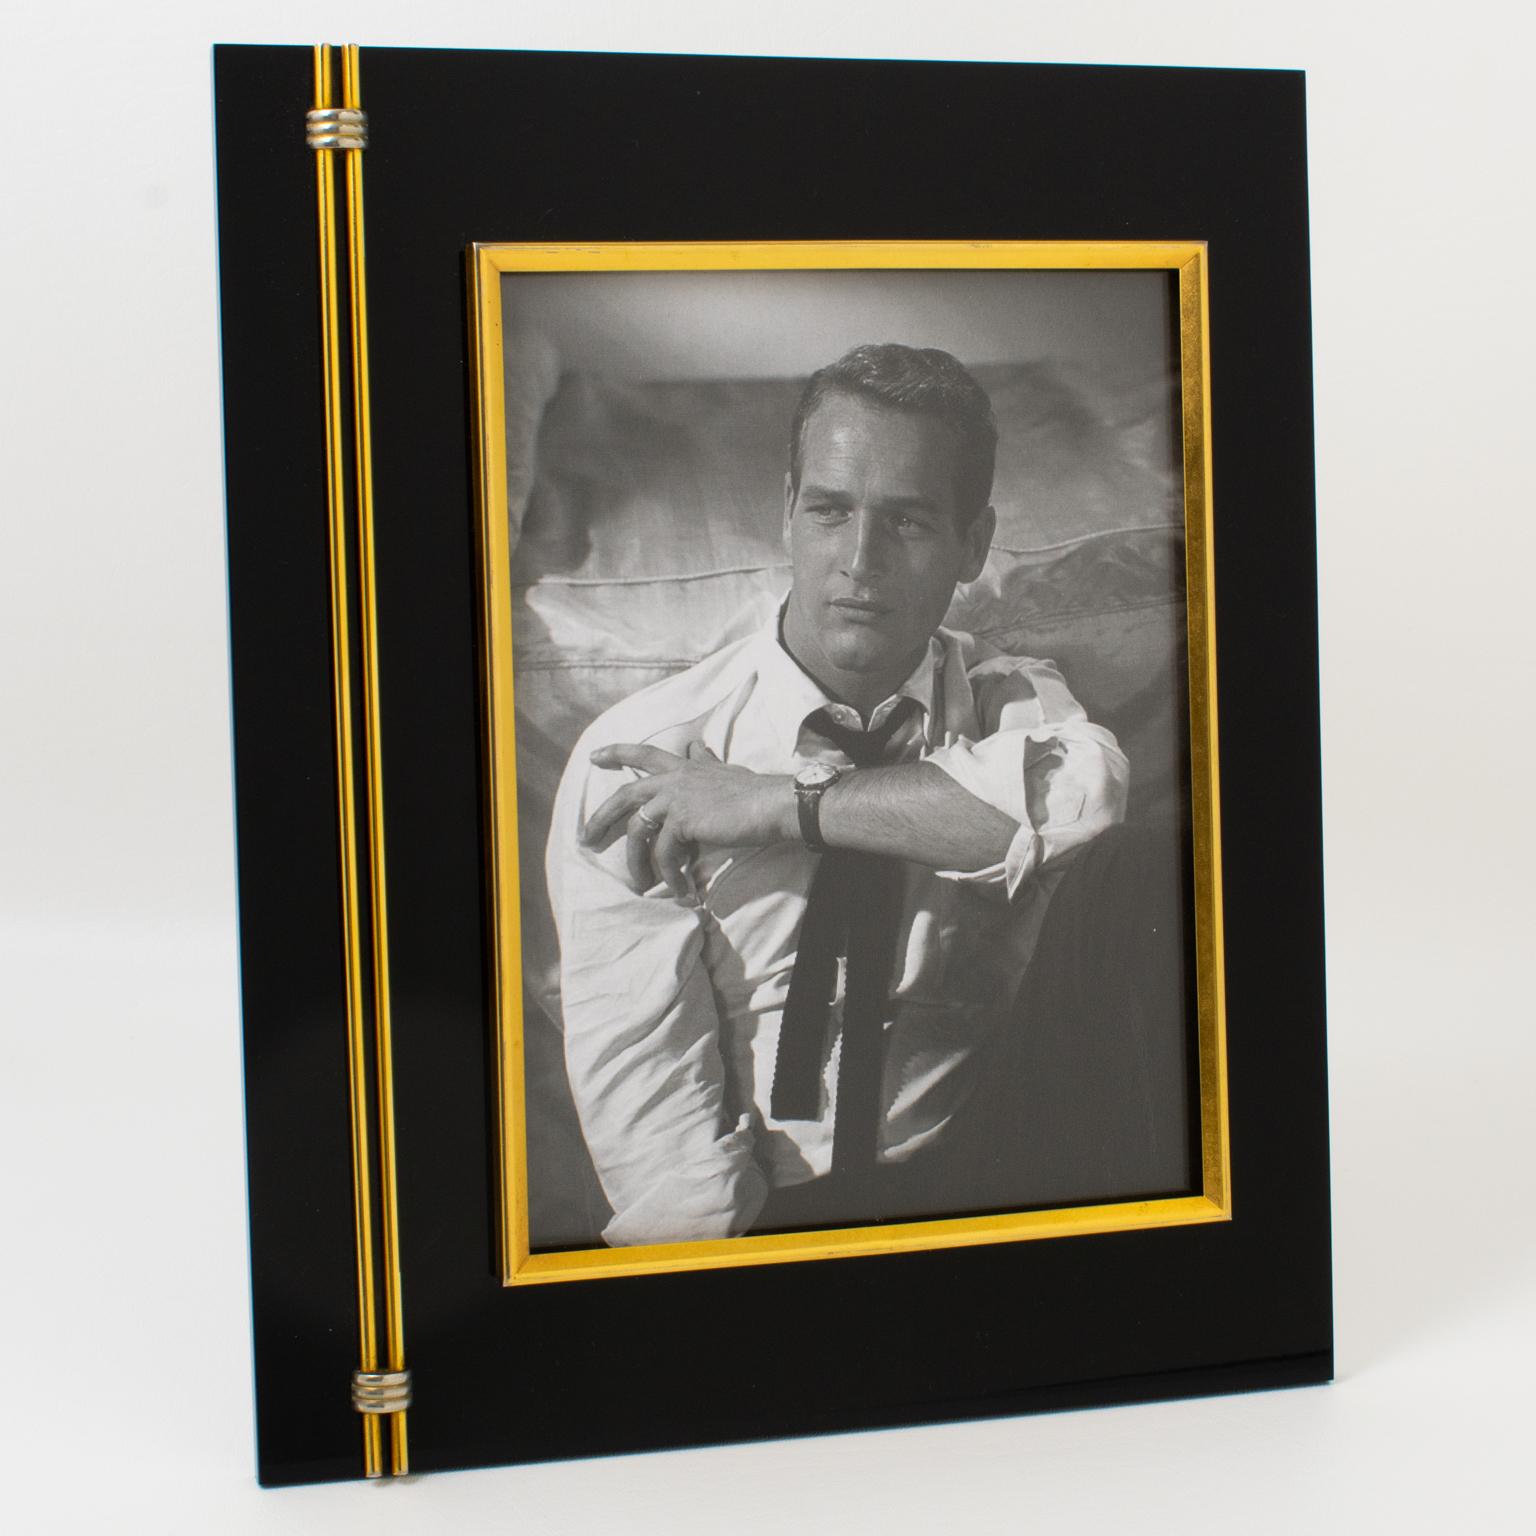 This elegant modernist picture photo frame was crafted in Italy in the 1970s. The refined minimalist design boasts a thick black Lucite slab with a gilded brass decor accent. The easel at the back is chromed metal. The frame can be placed in a